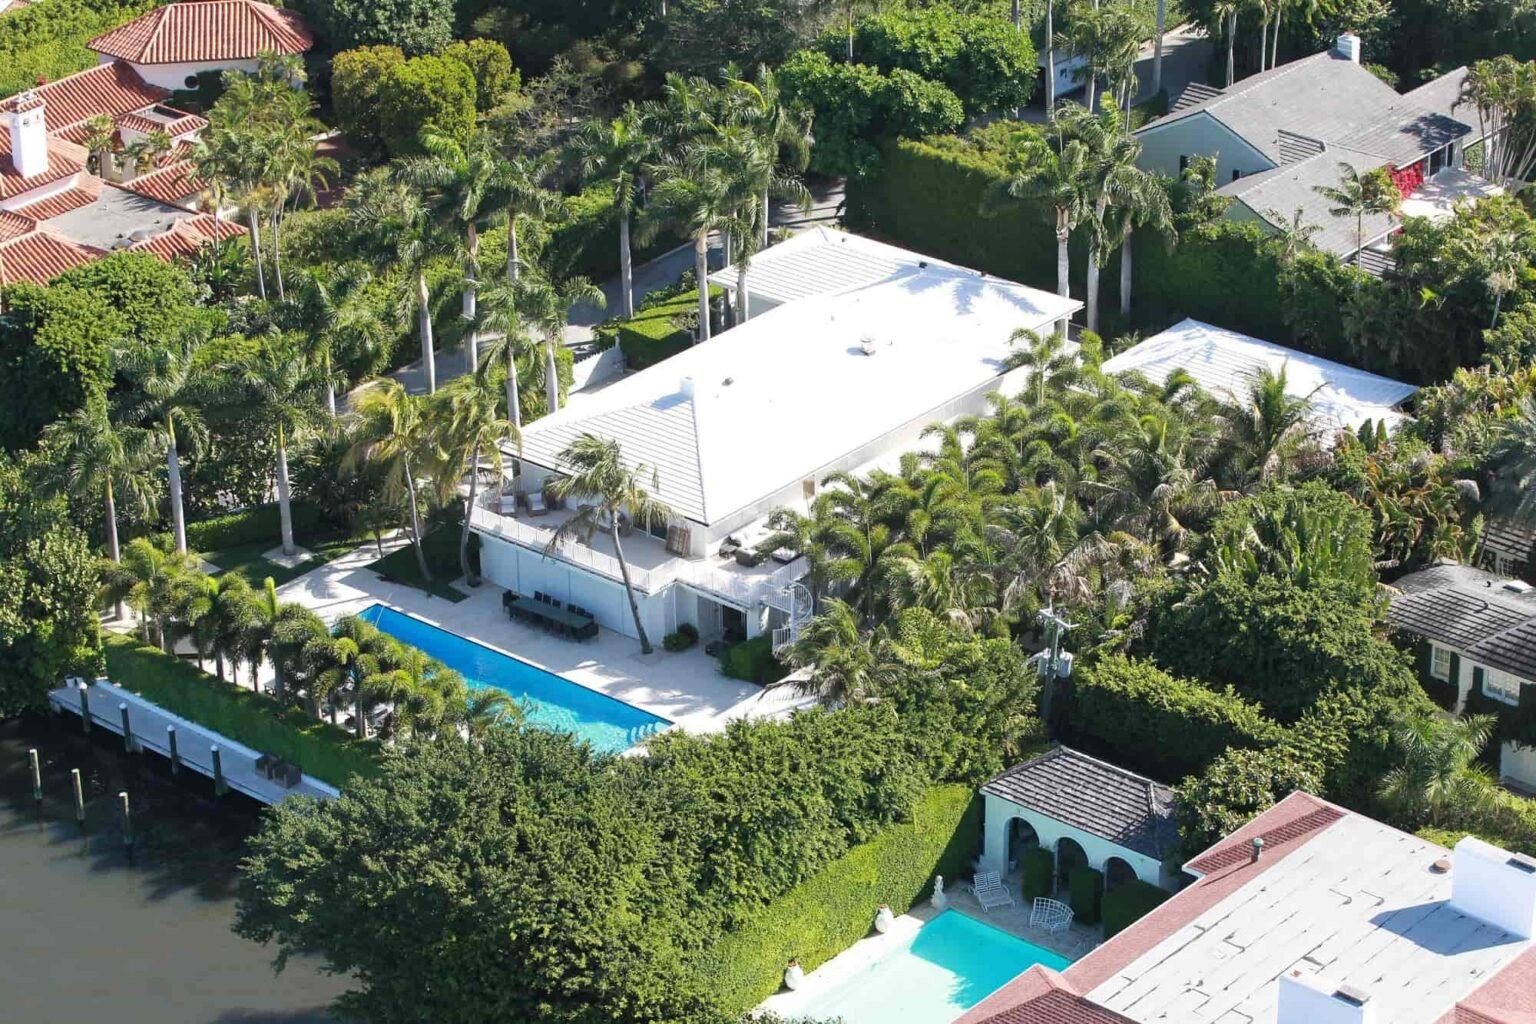 Jeffrey Epstein’s house will soon be torn down. What triggered this destruction and what will go in its place? Here’s everything we know.